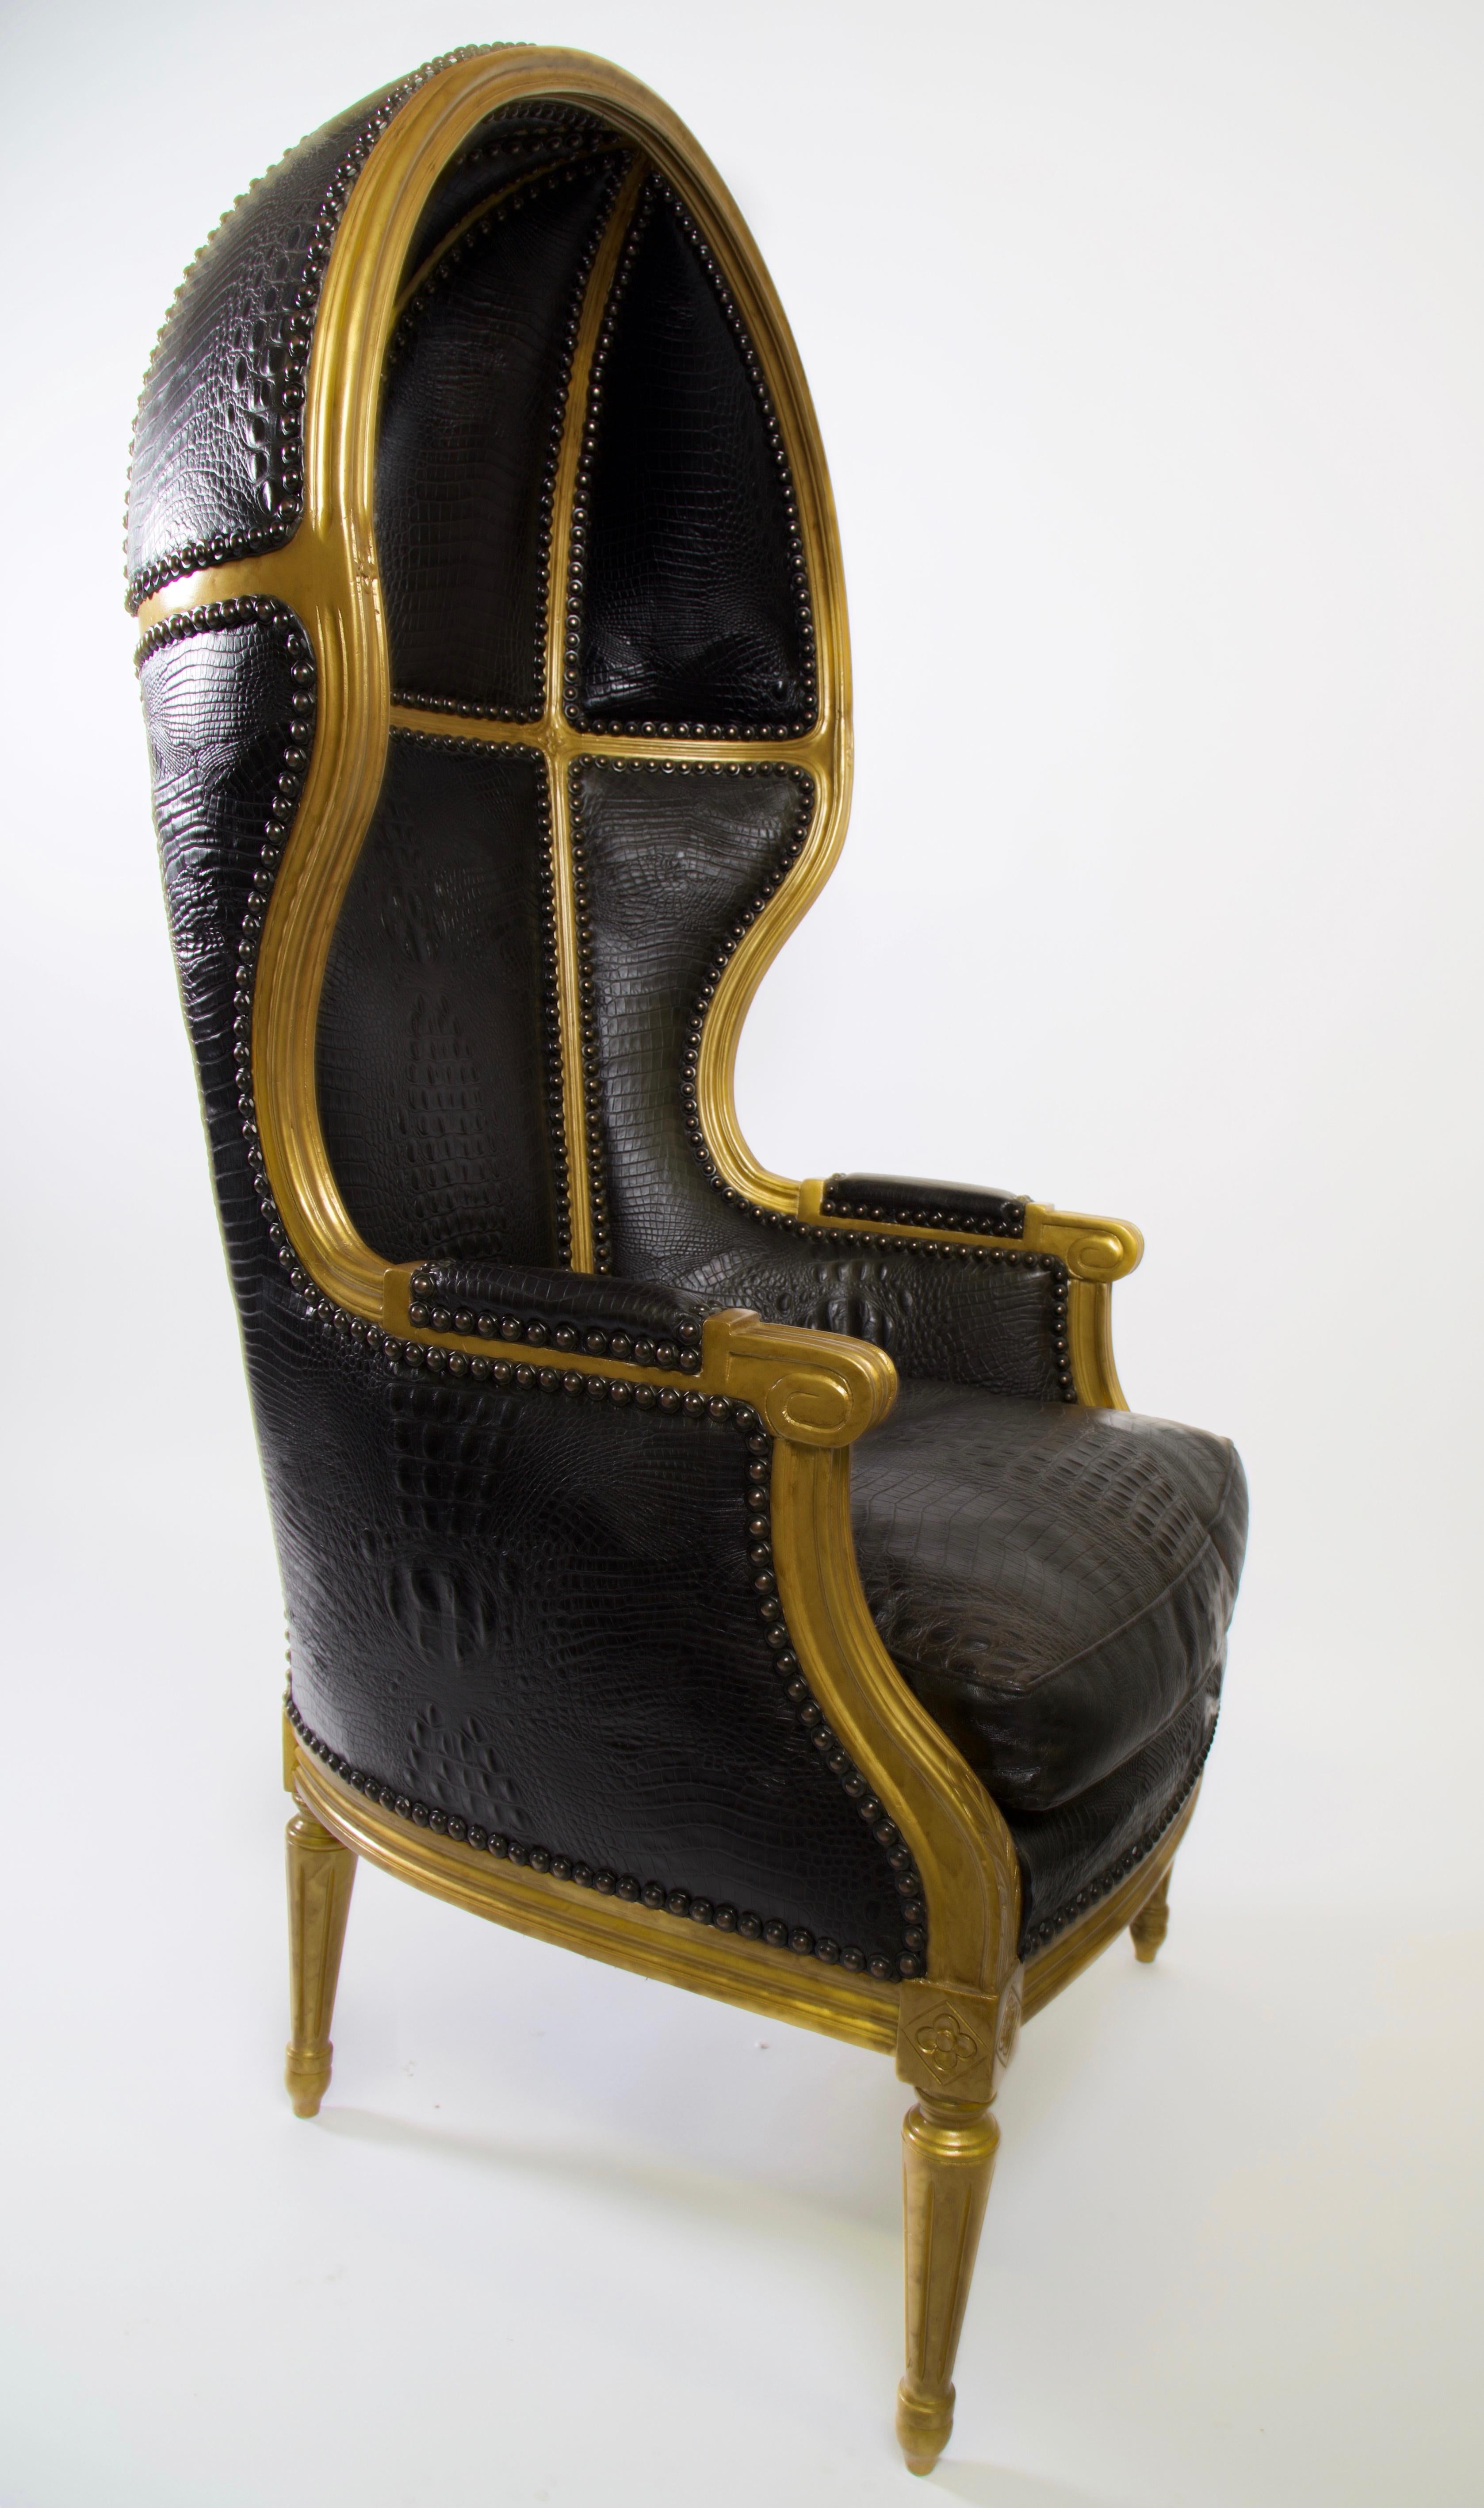 Vintage porter chair recently restored with black alligator embossed leather, modern nailhead trim, and antique gold lacquered wood. This is a show stopper. Amazing conversation piece it will command the attention in a room.

A porter's chair was